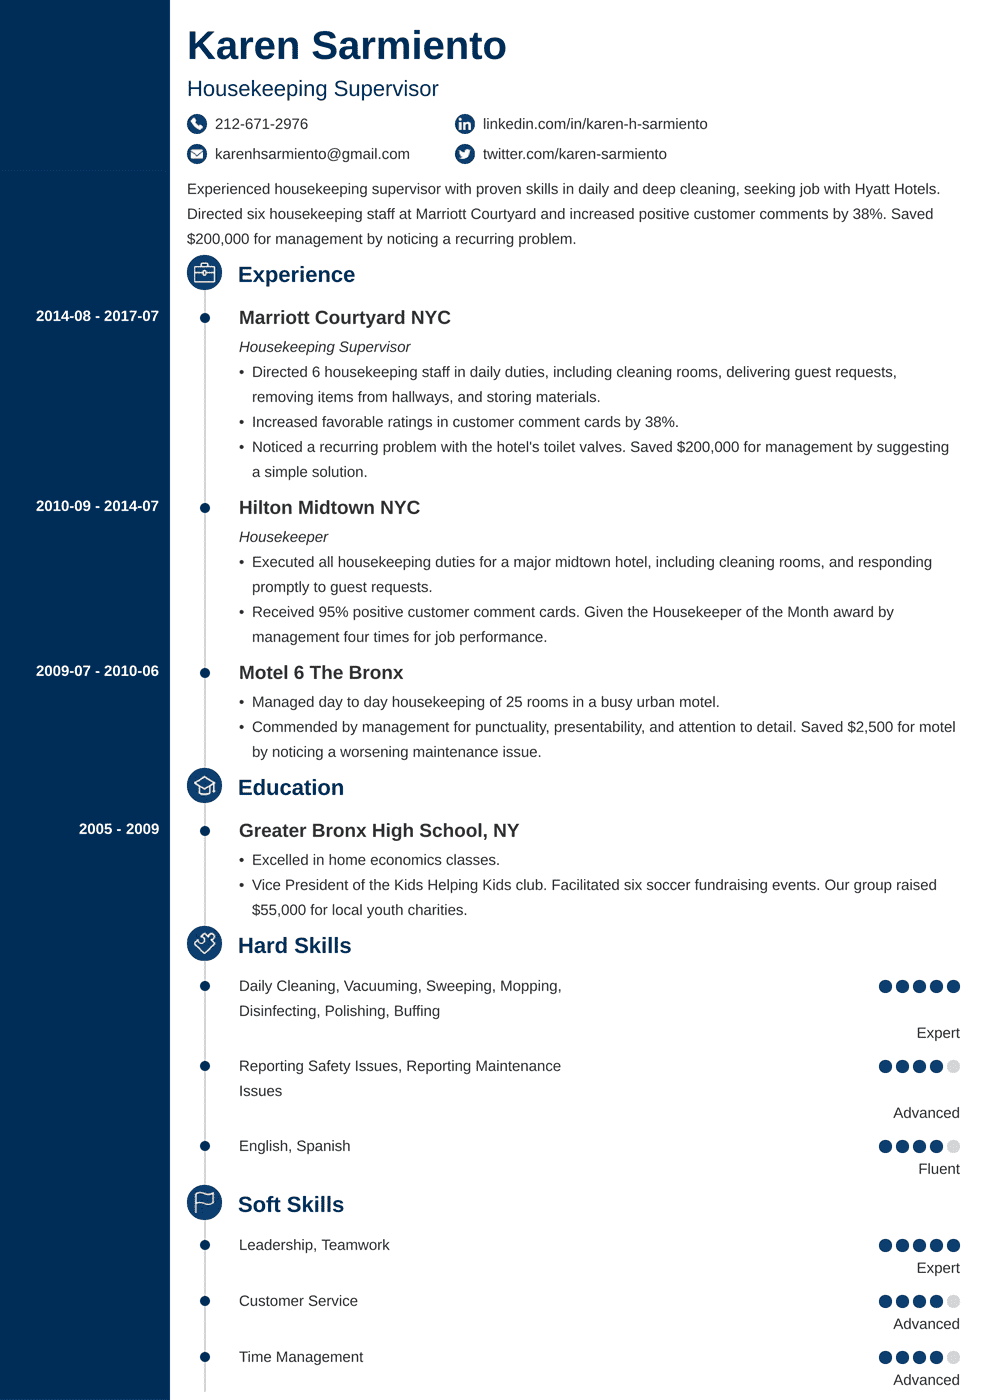 Housekeeping Resume With Examples (Job Description, Skills)